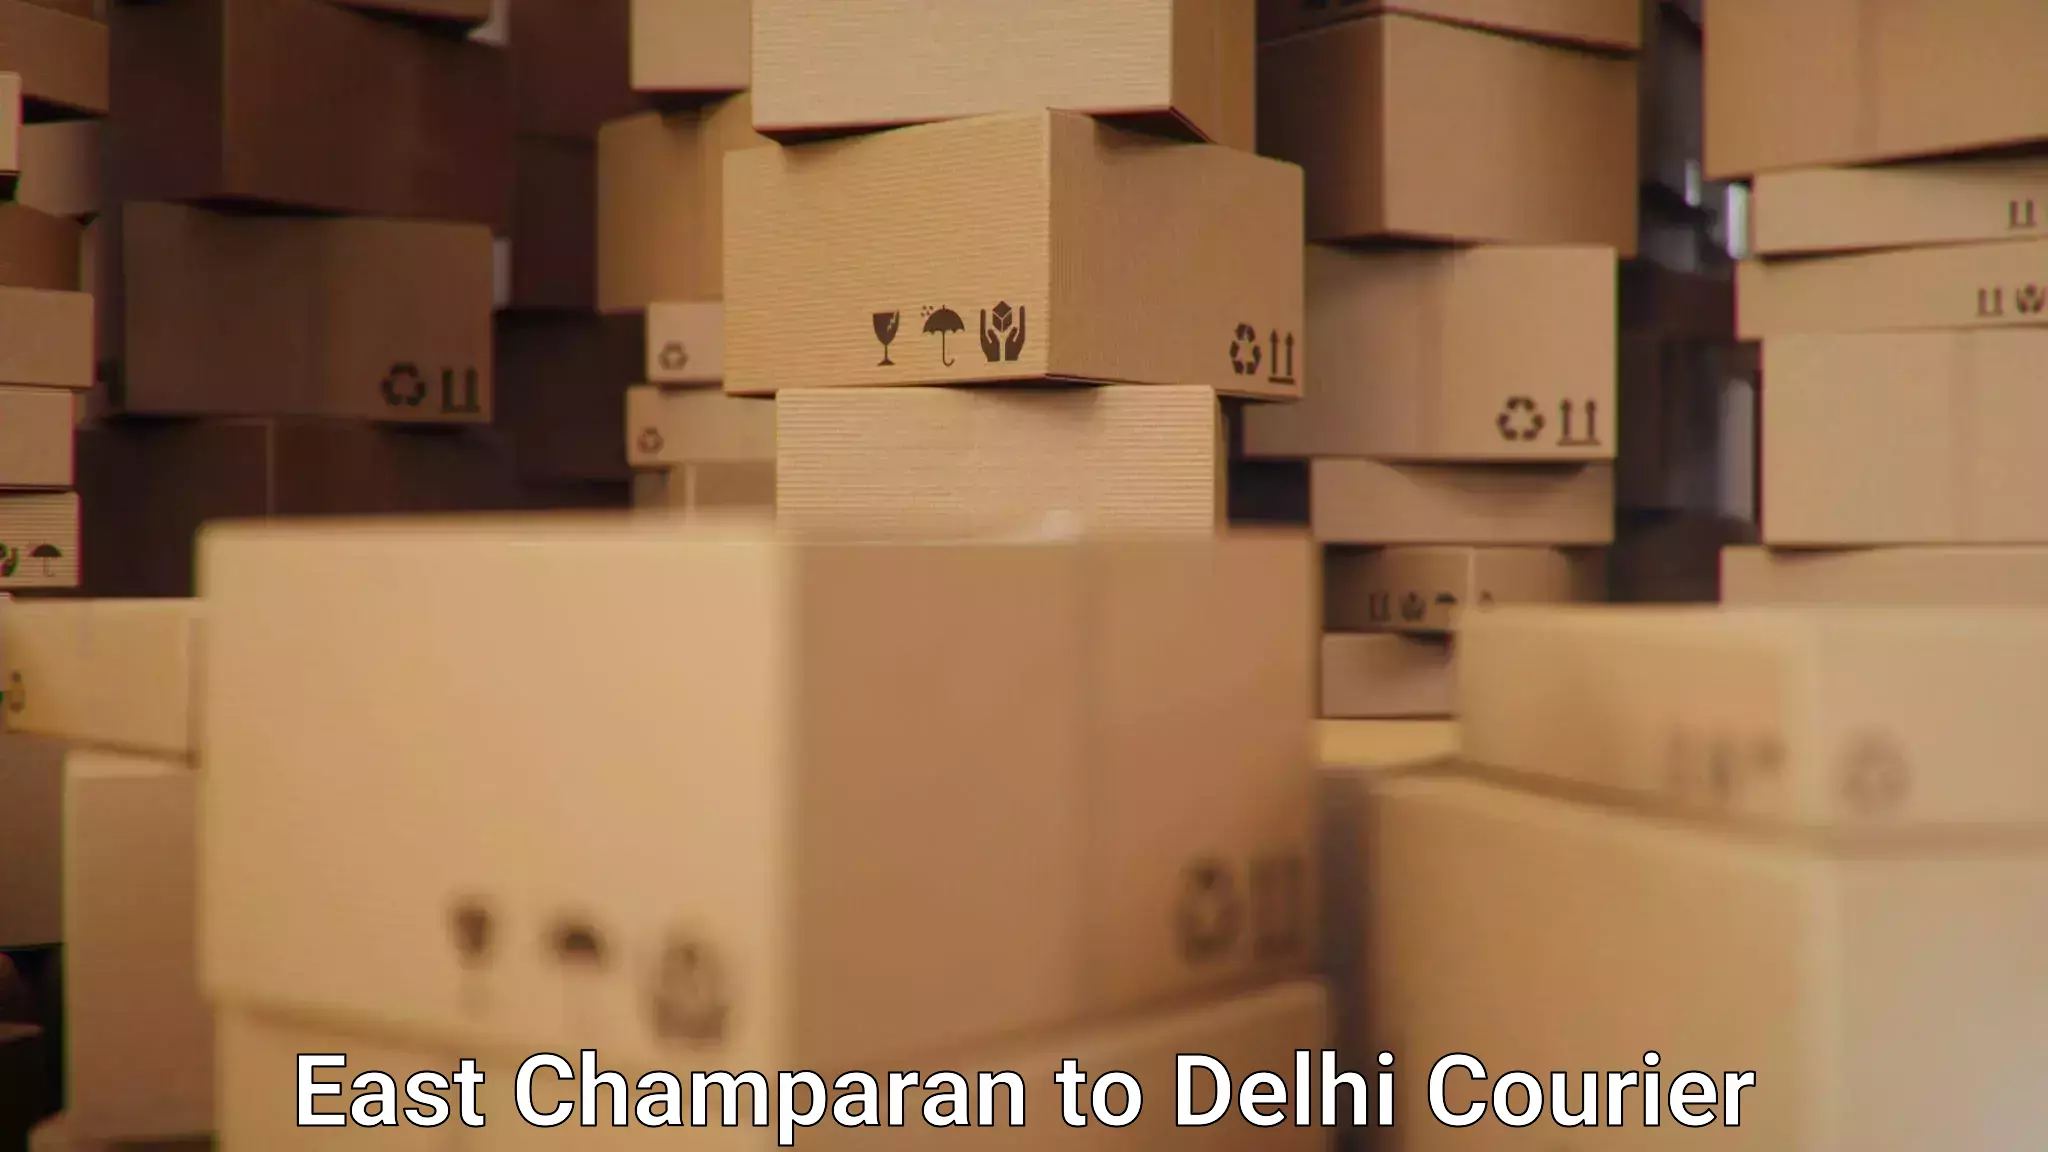 Fast-track shipping solutions East Champaran to NCR